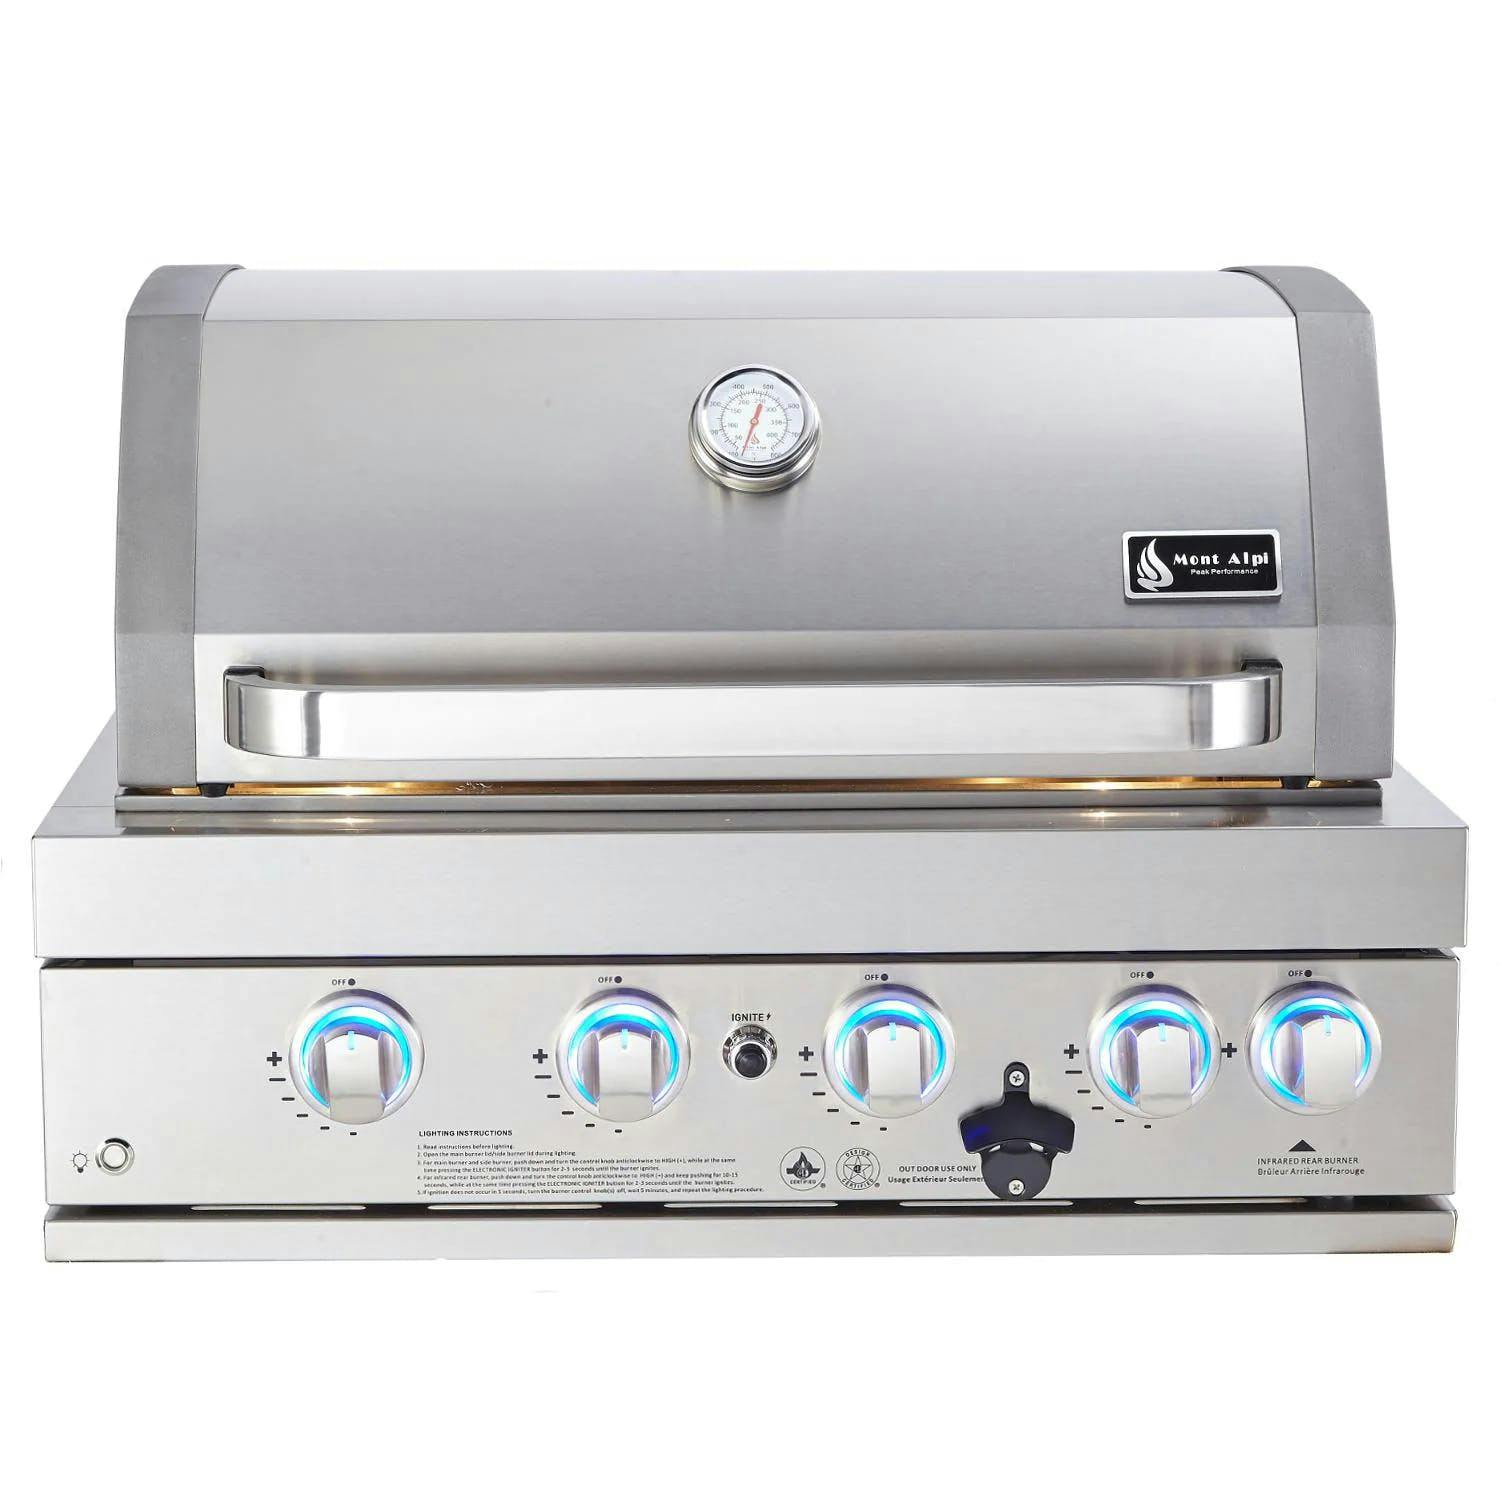 Mont Alpi Built-in Gas Grill